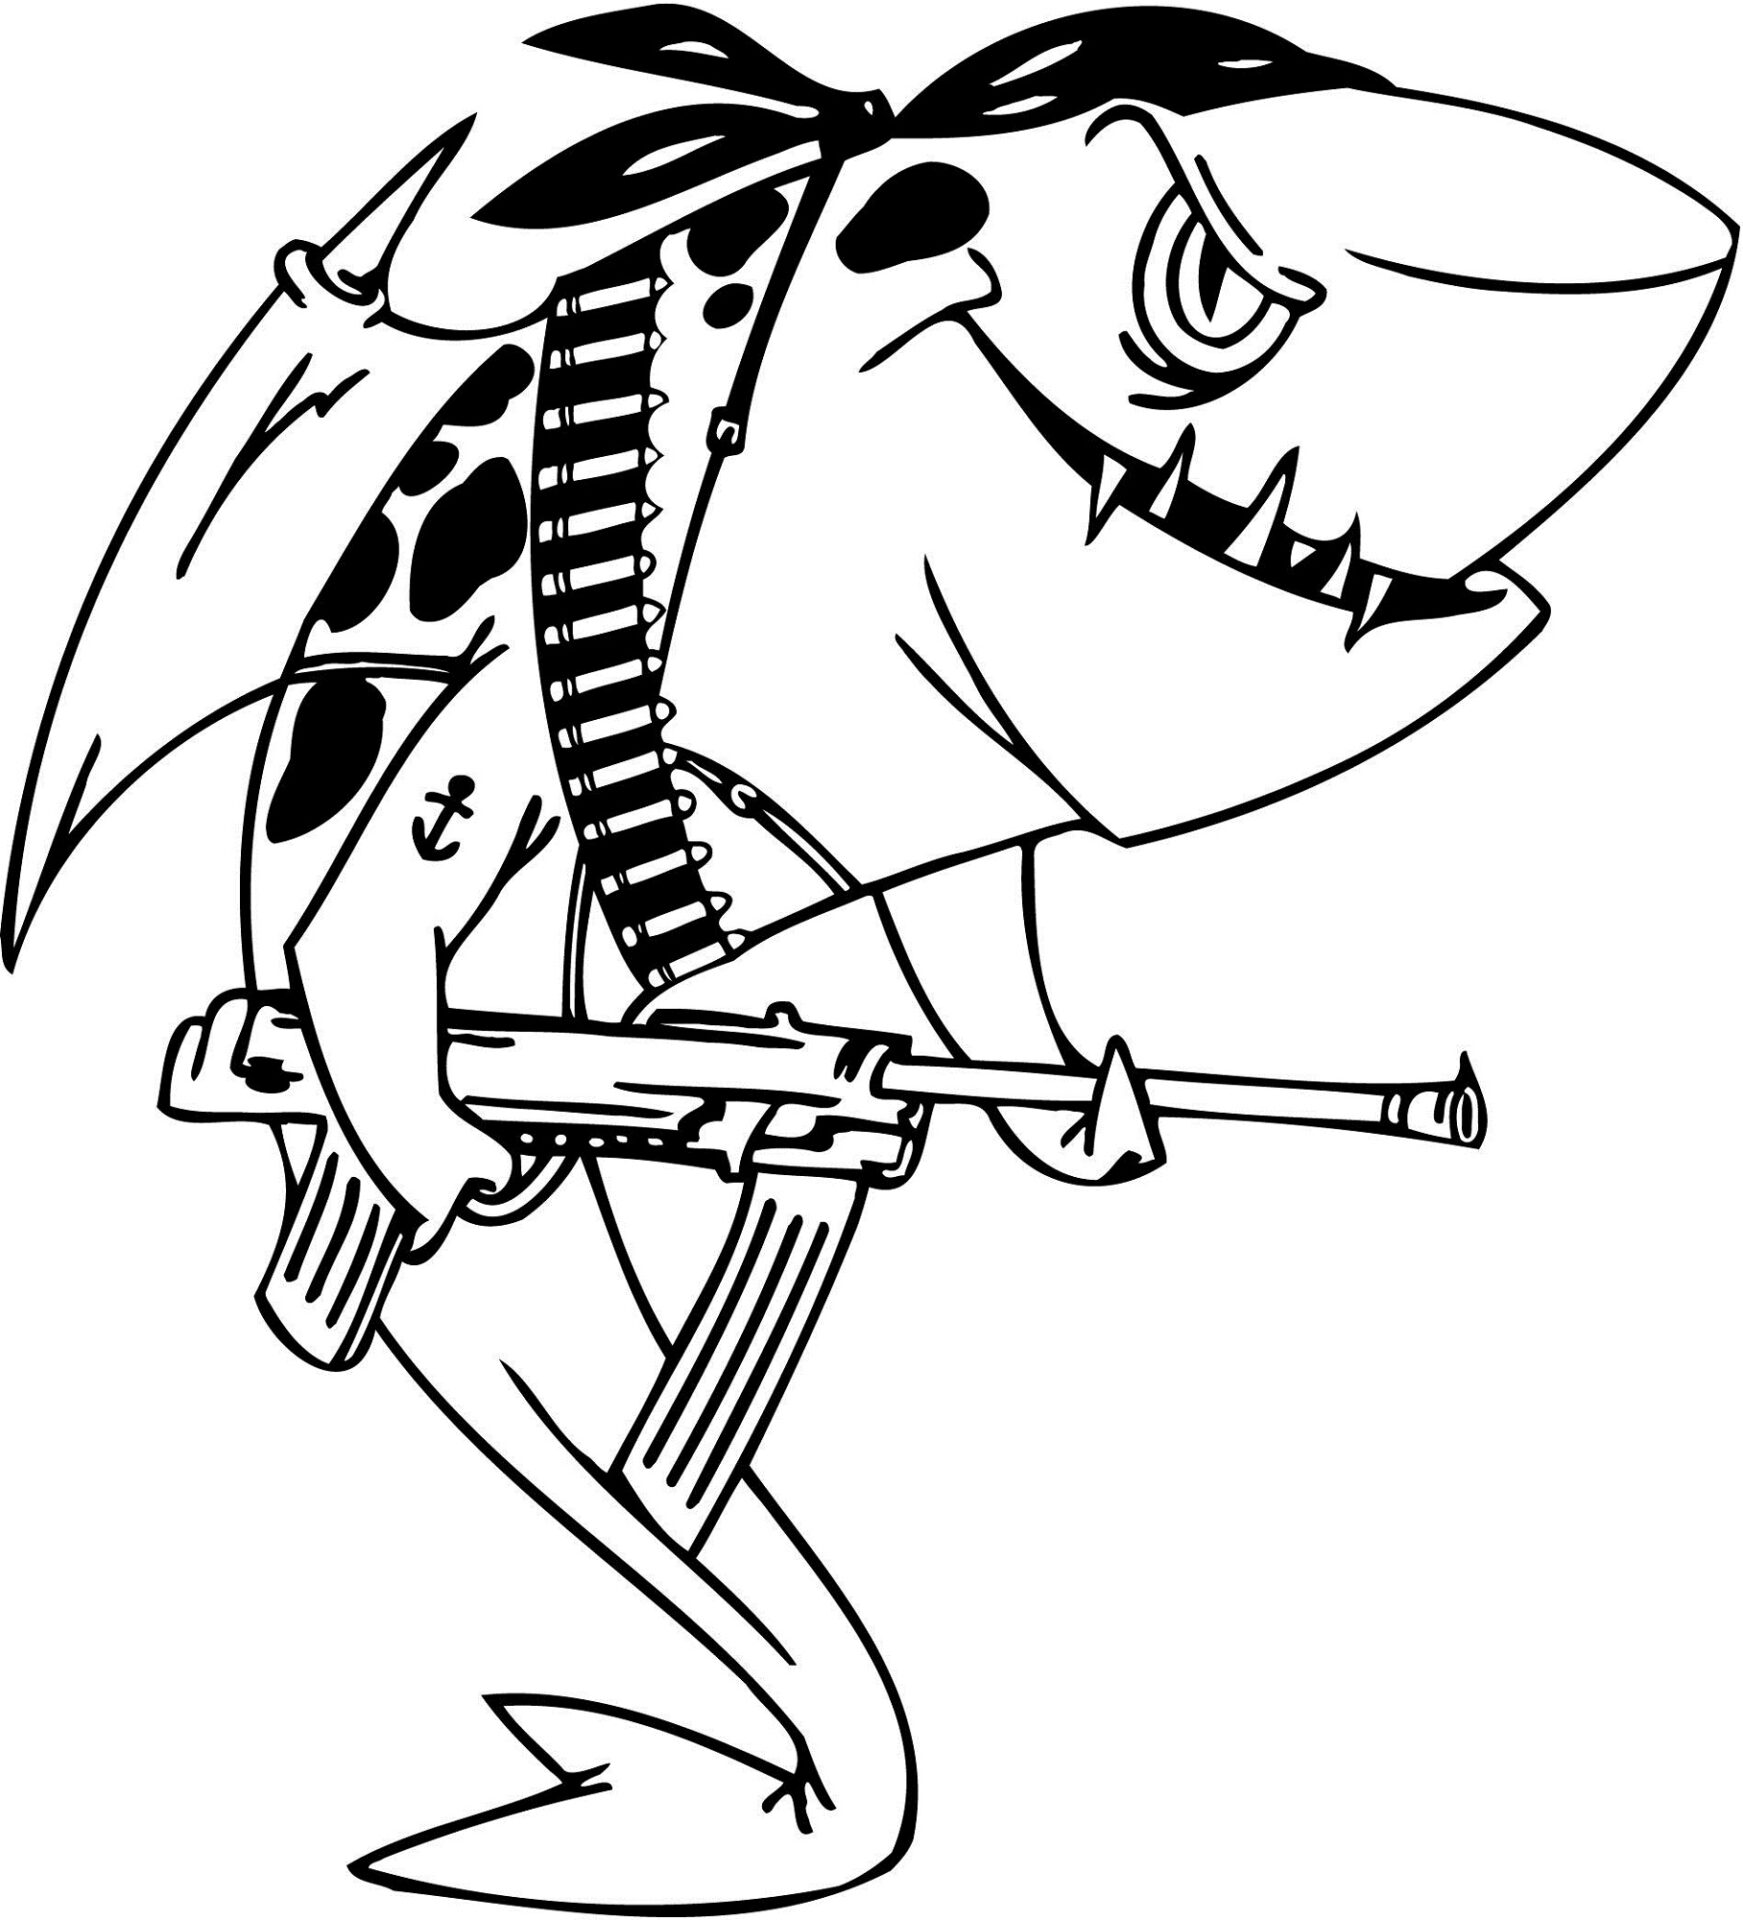 Download Shark Coloring Pages Free Printable Coloring Pages For Kids